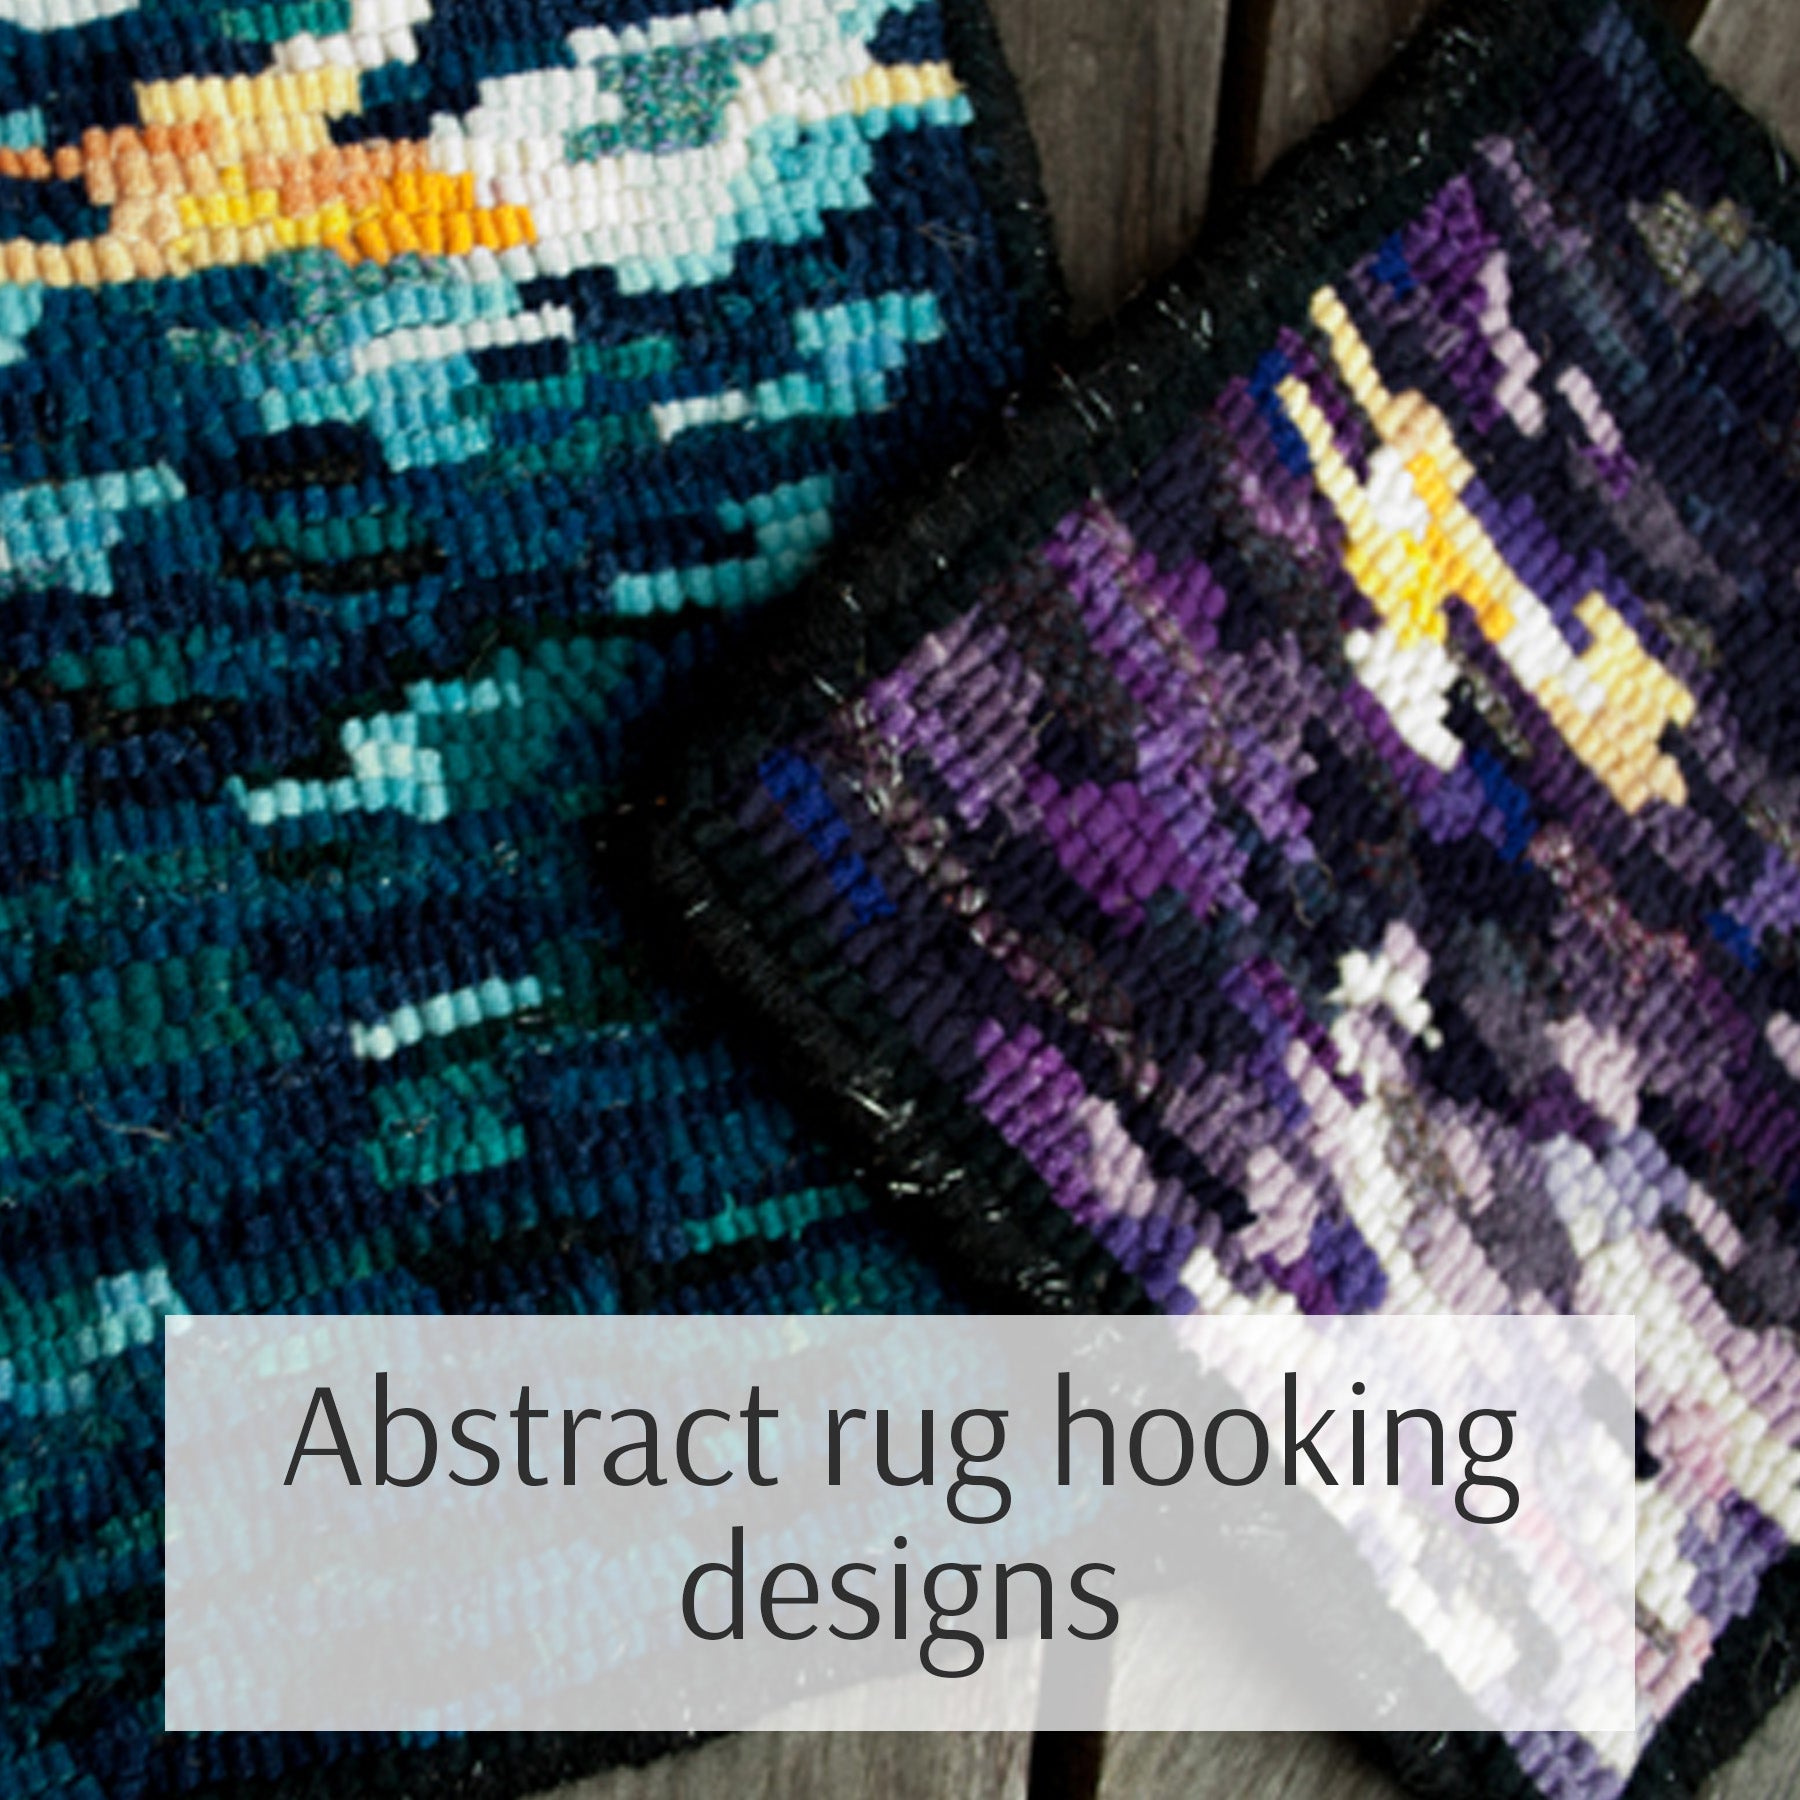 7 abstract rug hooking design ideas